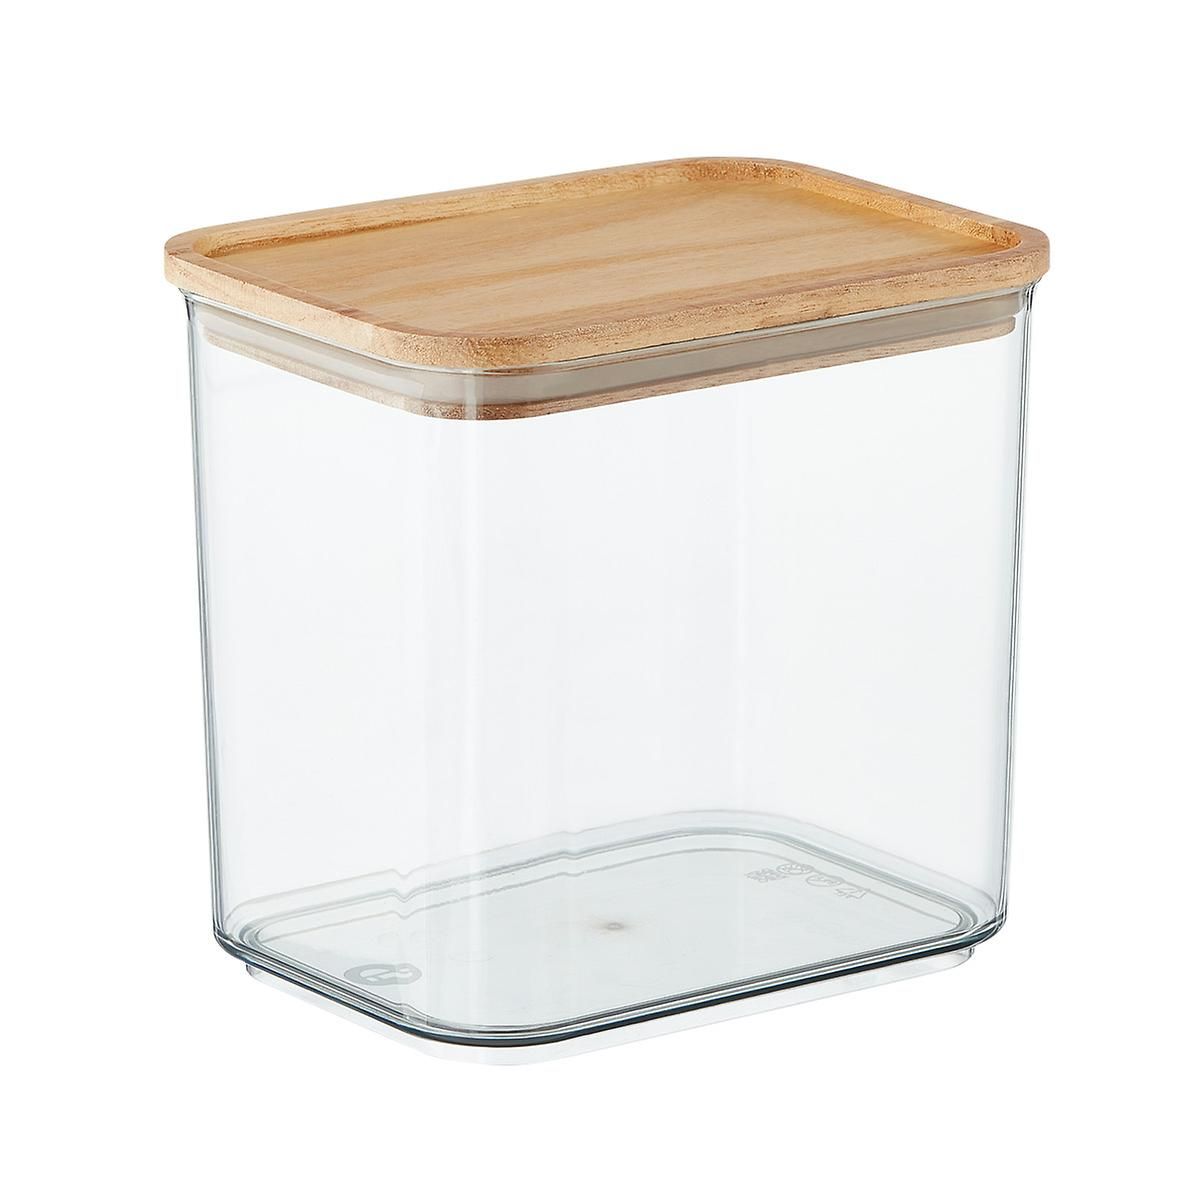 Rosanna Pansino x iD 3.5 c. Canister w/ Wood Lid Clear | The Container Store